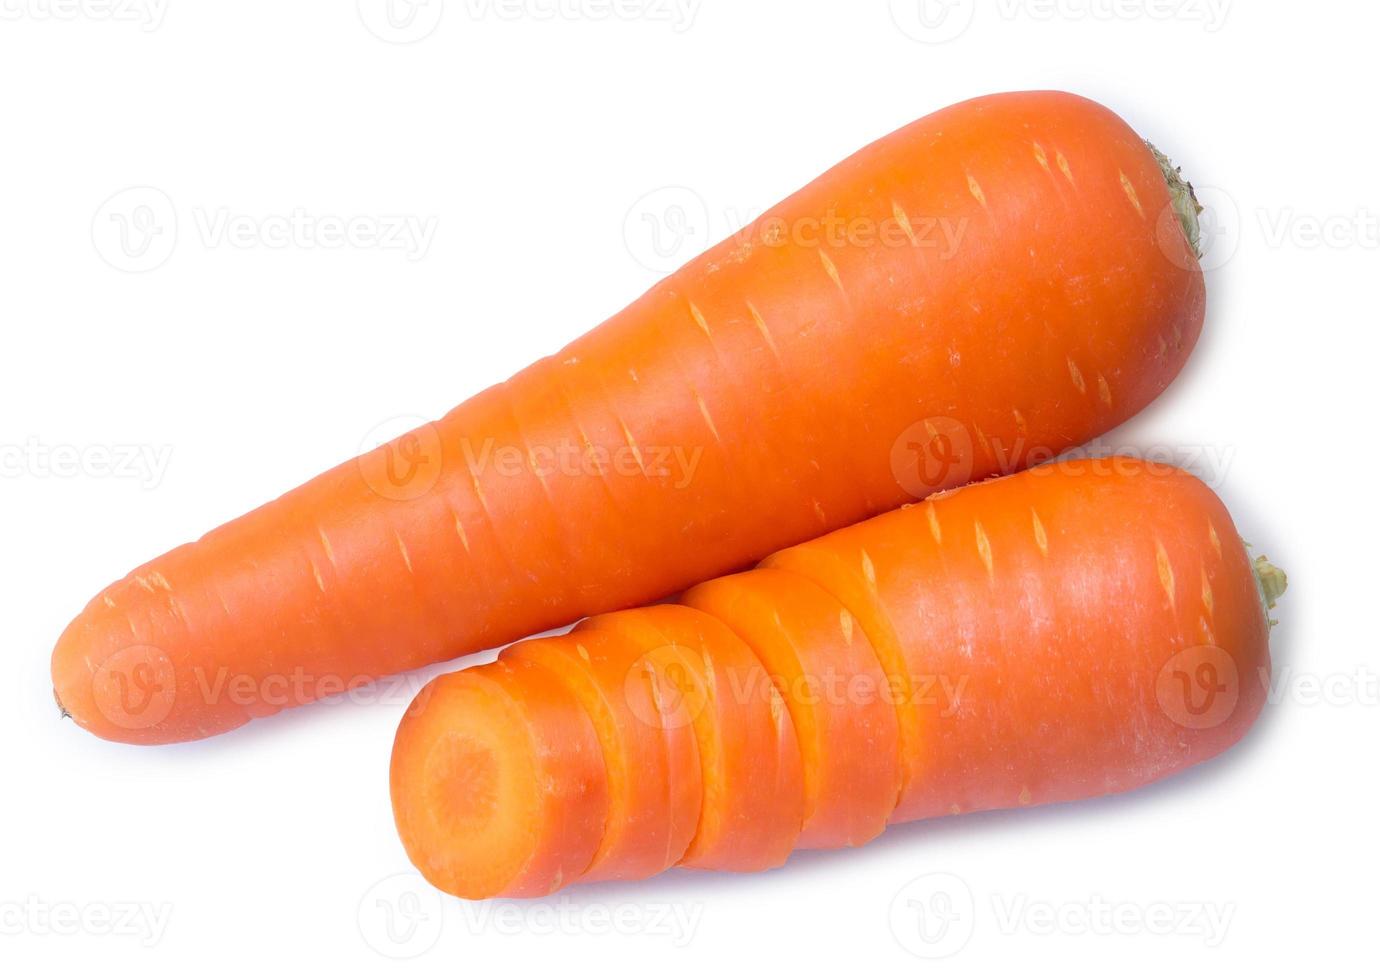 Flat laying of two fresh orange carrots with slices isolated on white background with clipping path photo